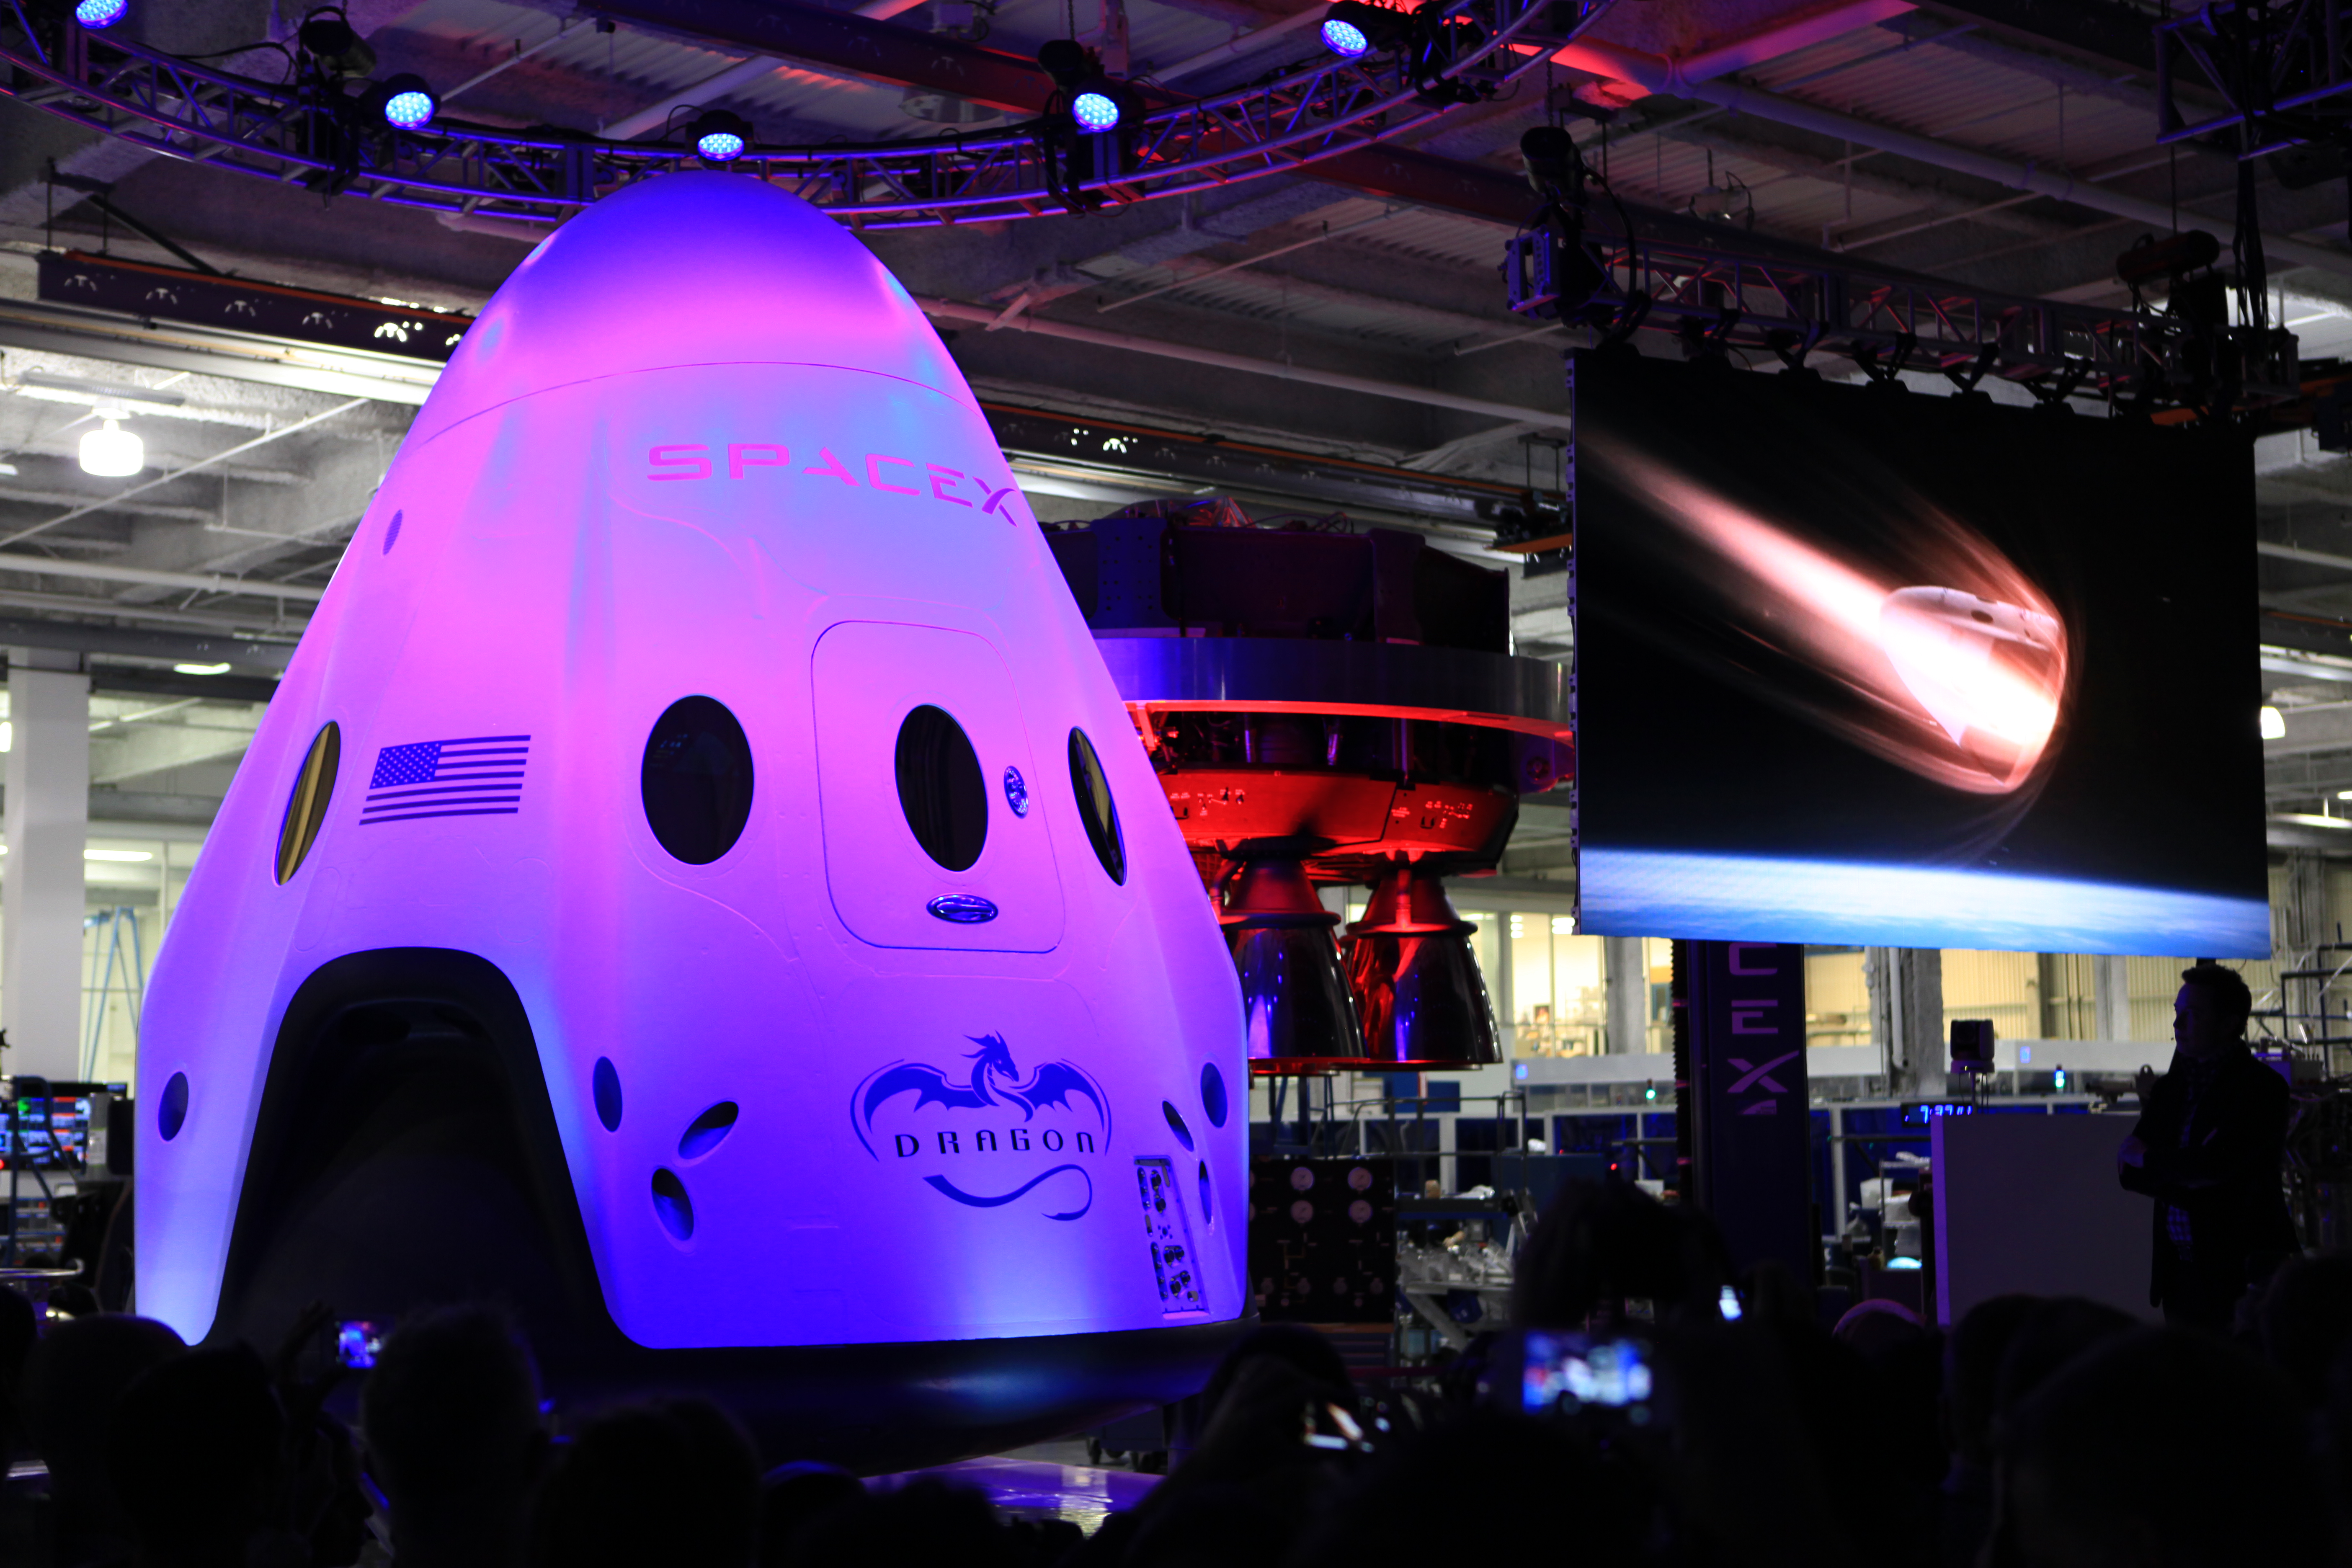 Unveiled at Space X's headquarter, the Dragon 2 capsule will take astronauts to the International Space Station. Image: Space X